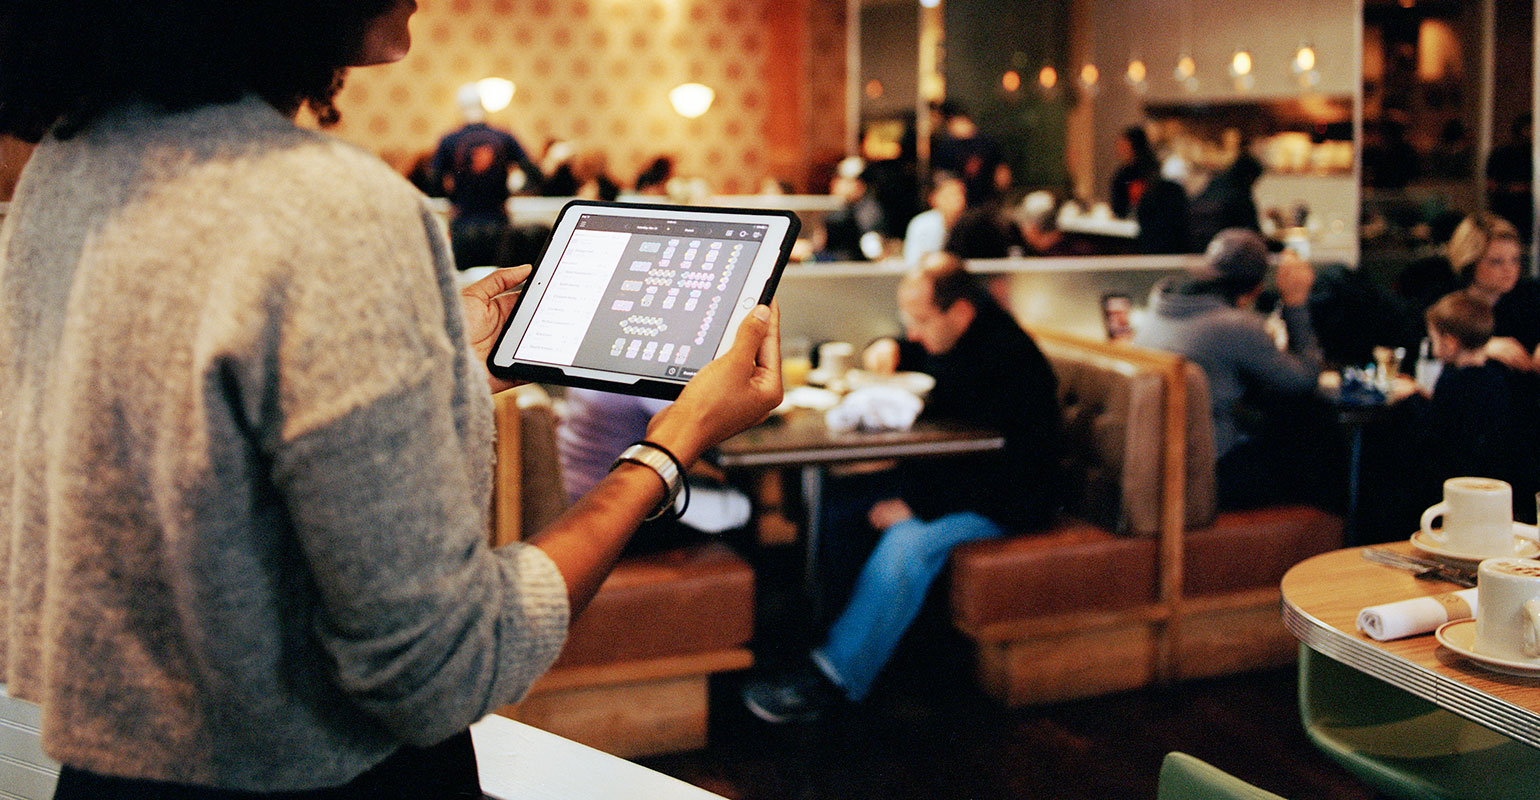 OpenTable and Square for Restaurants